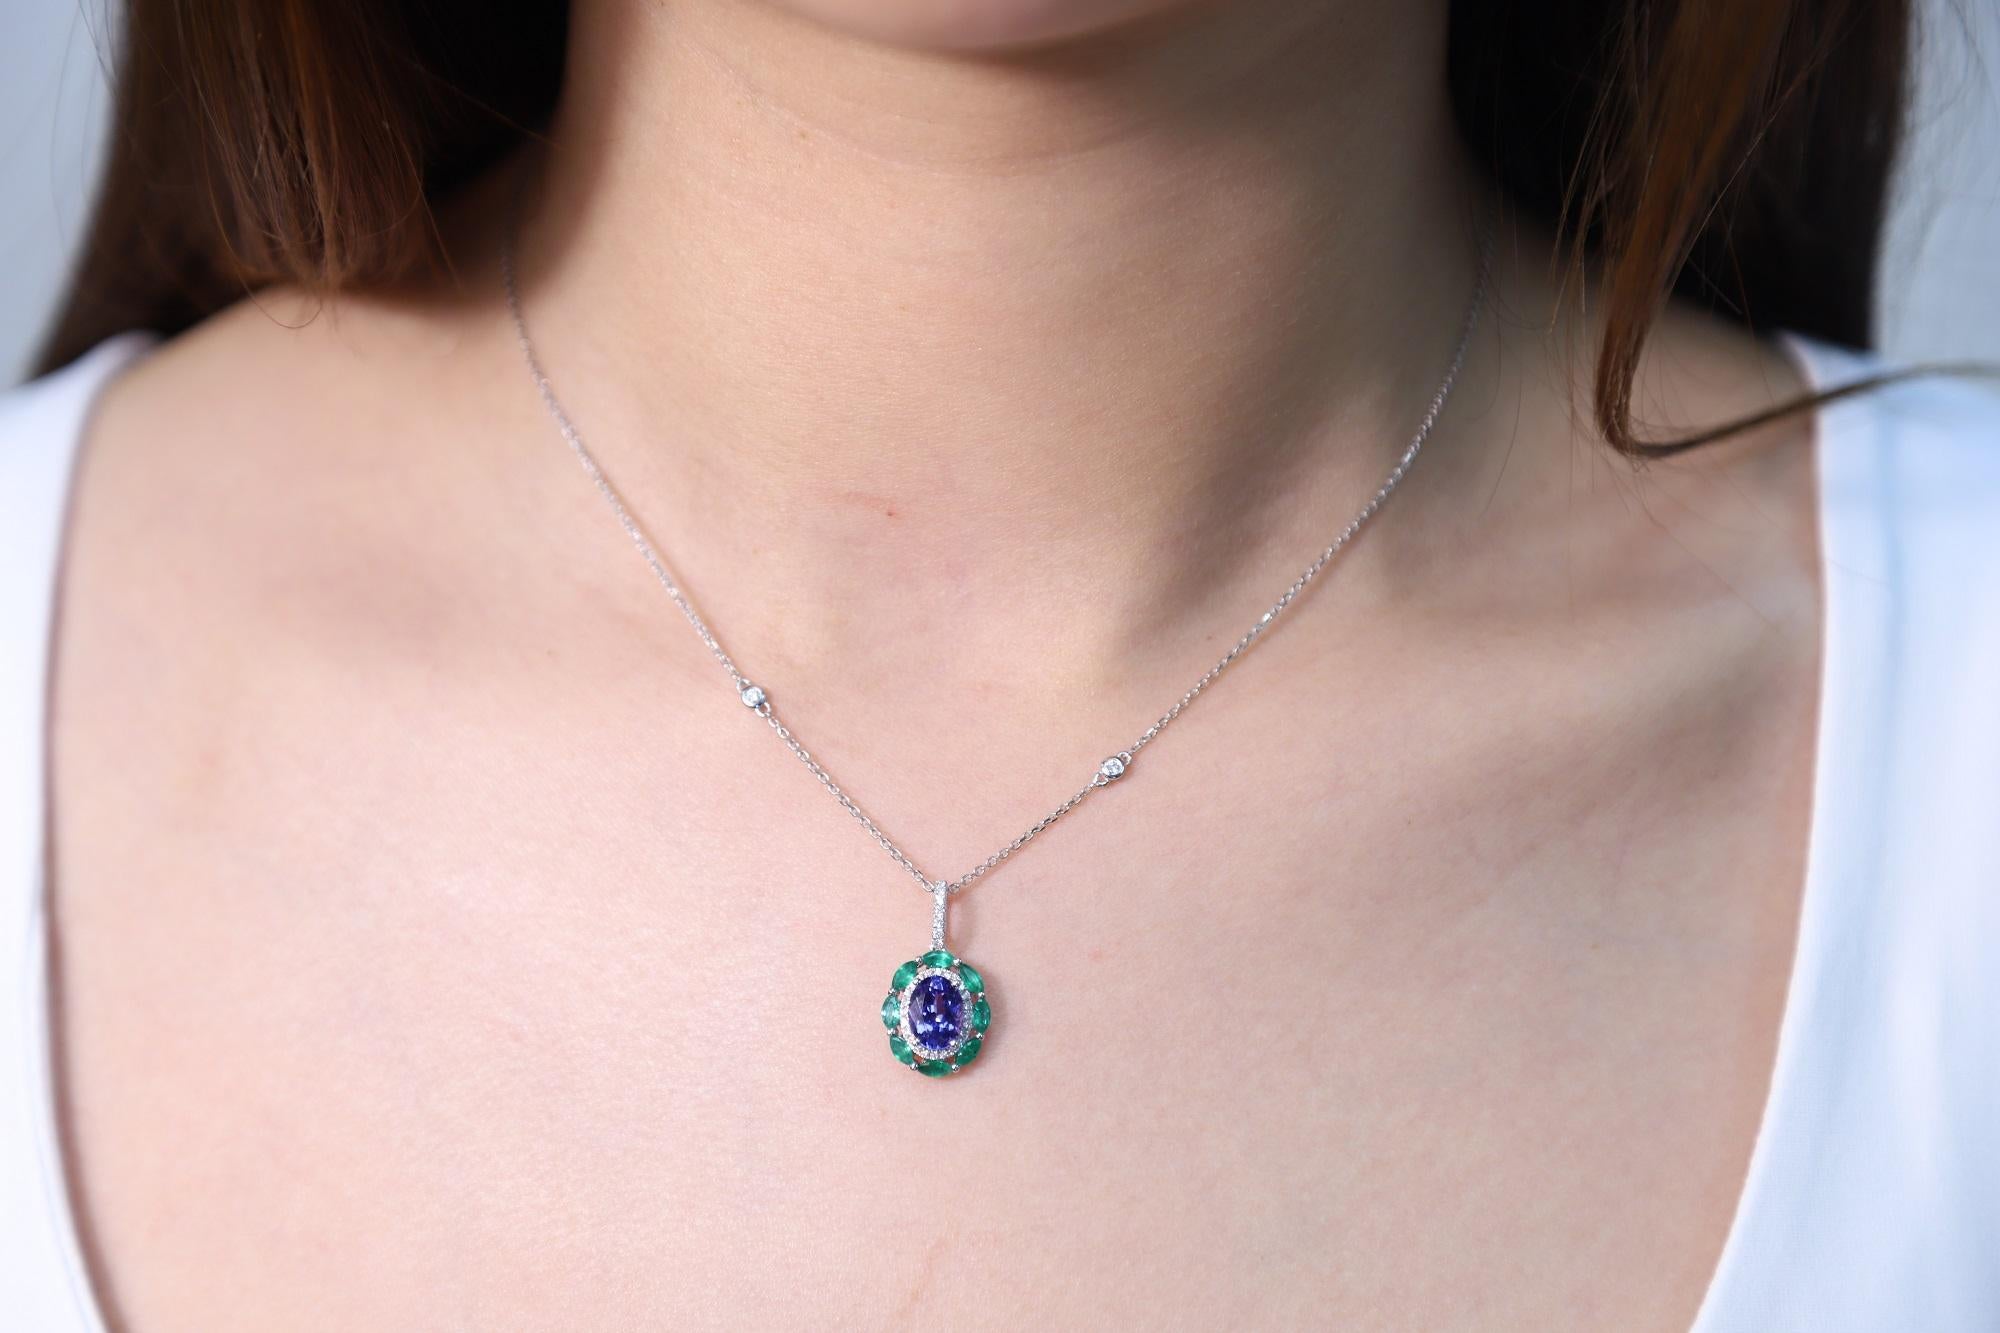 Stunning, timeless and classy eternity Unique Pendant. Decorate yourself in luxury with this Gin & Grace Pendant. The 14k White Gold jewelry boasts Oval Cut Prong Setting Genuine Tanzanite (1 pcs) 1.13 Carat, Round cut Emerald (8 pcs) 0.56 carat